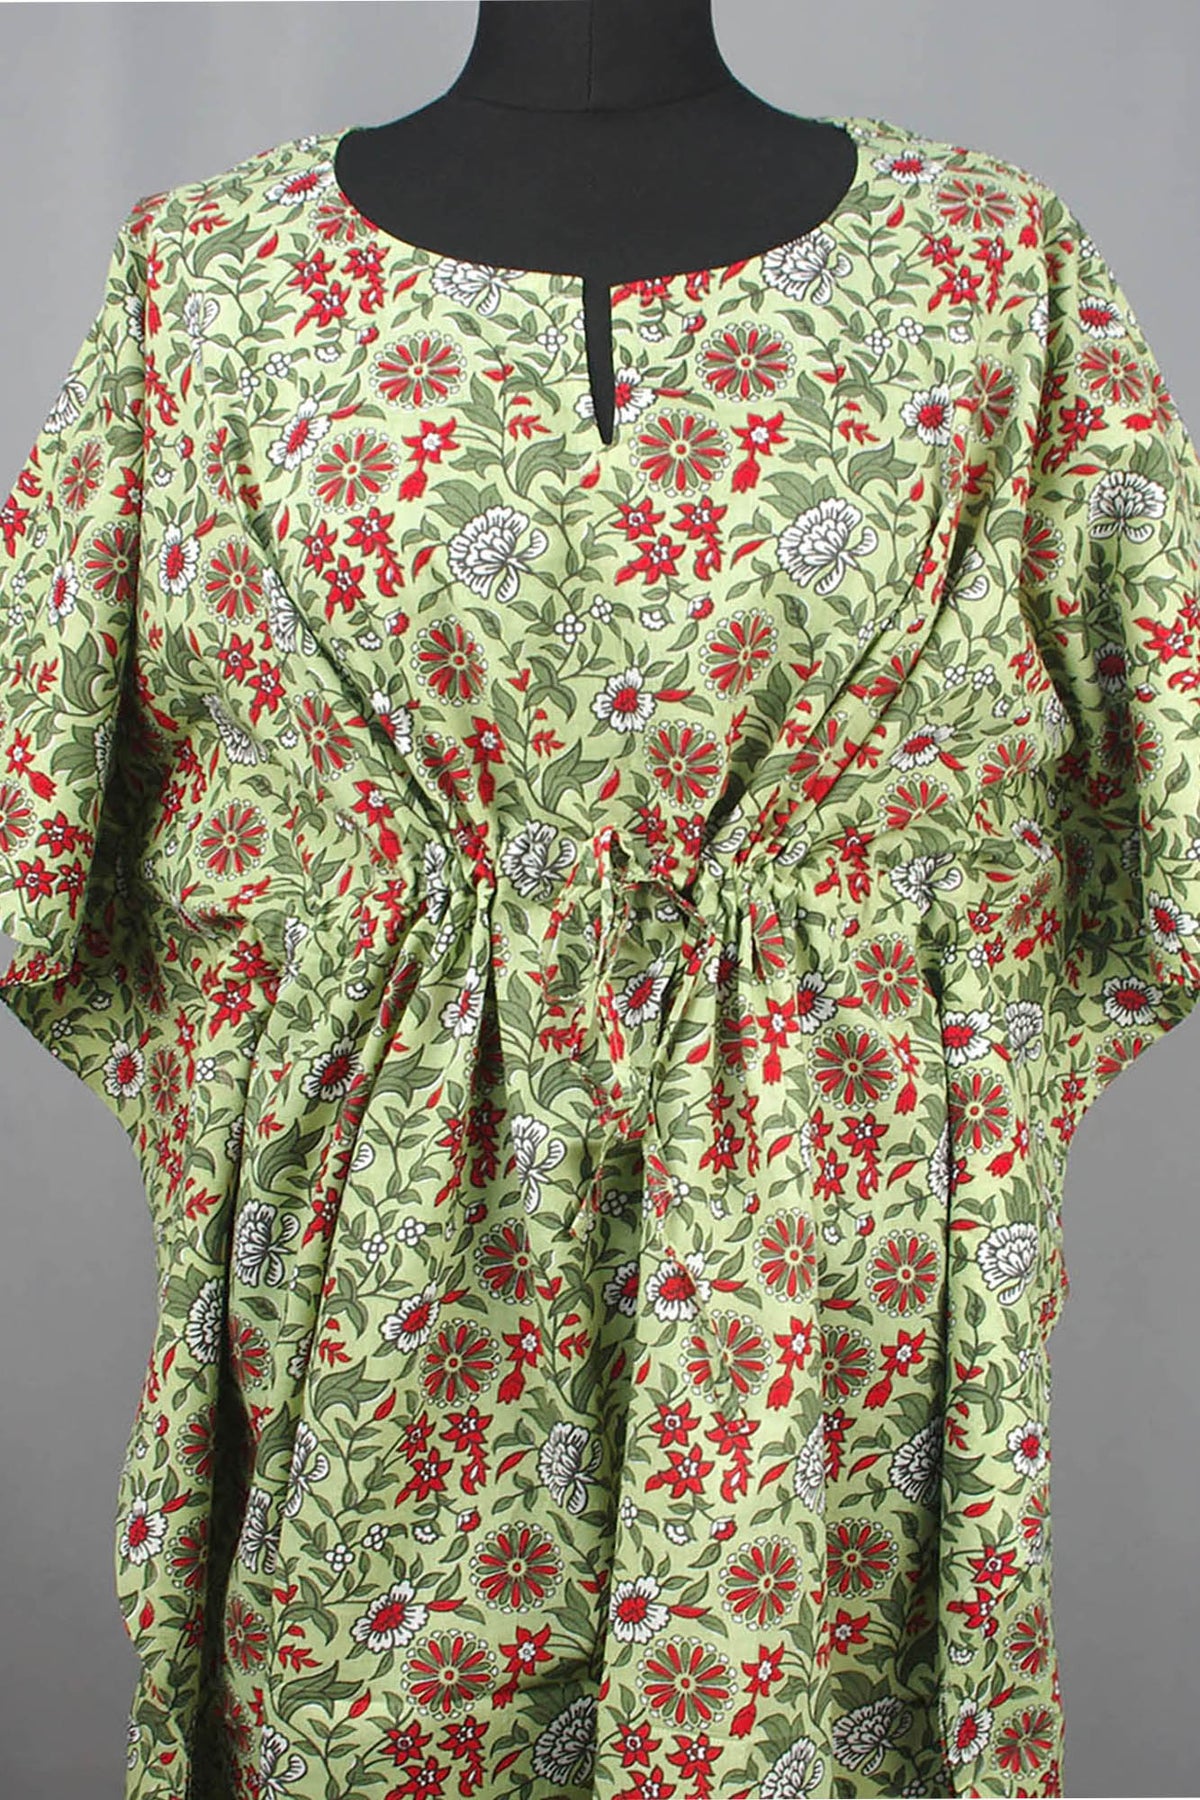 Block Printed Cotton Coverup / Kaftans - Green Red Floral